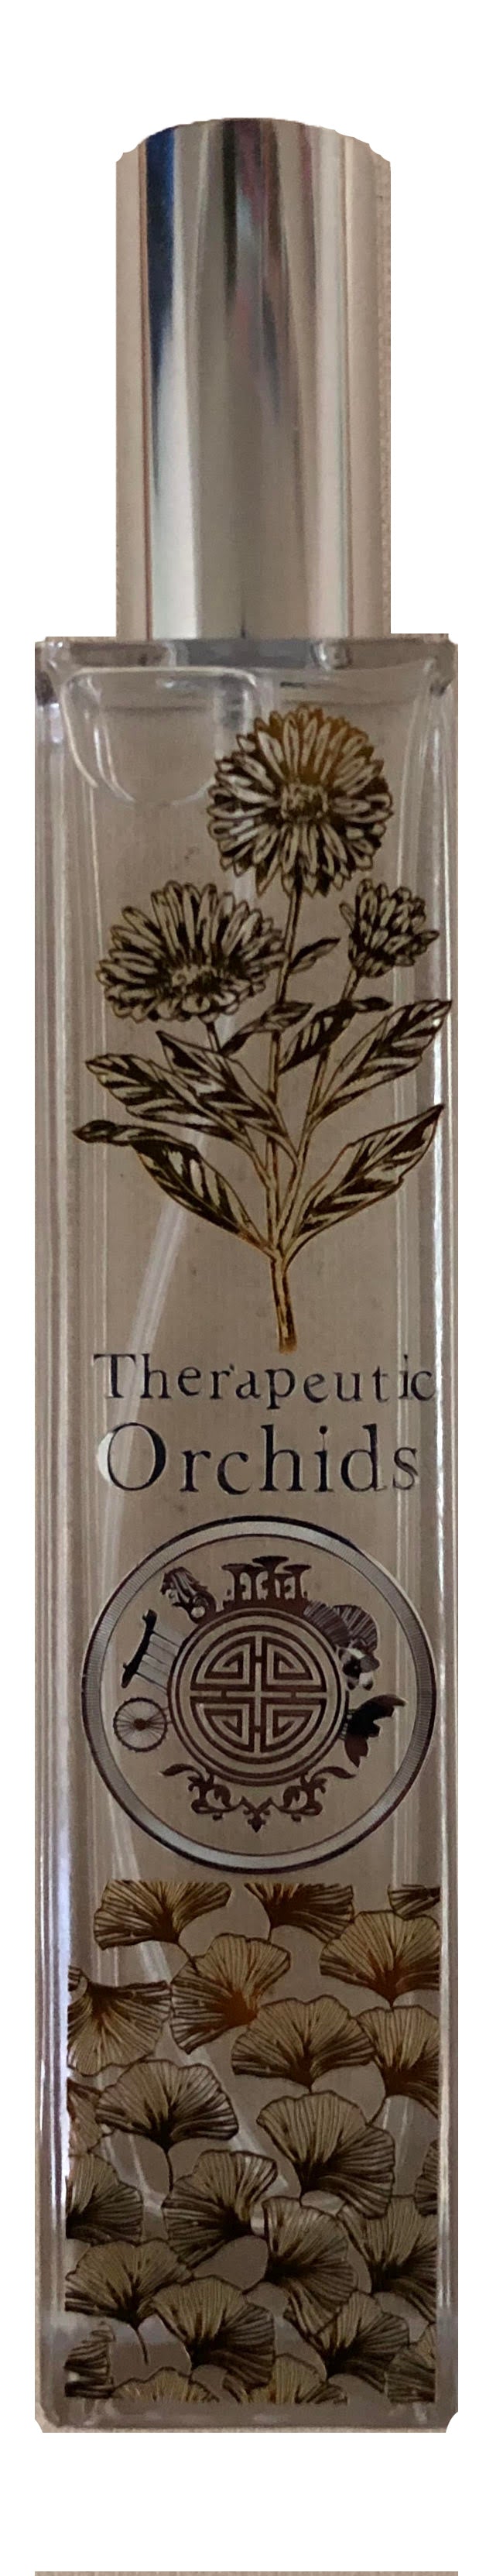 Therapeutic medicinal orchids singapore scent is a Perfect gift for corporate events in singapore